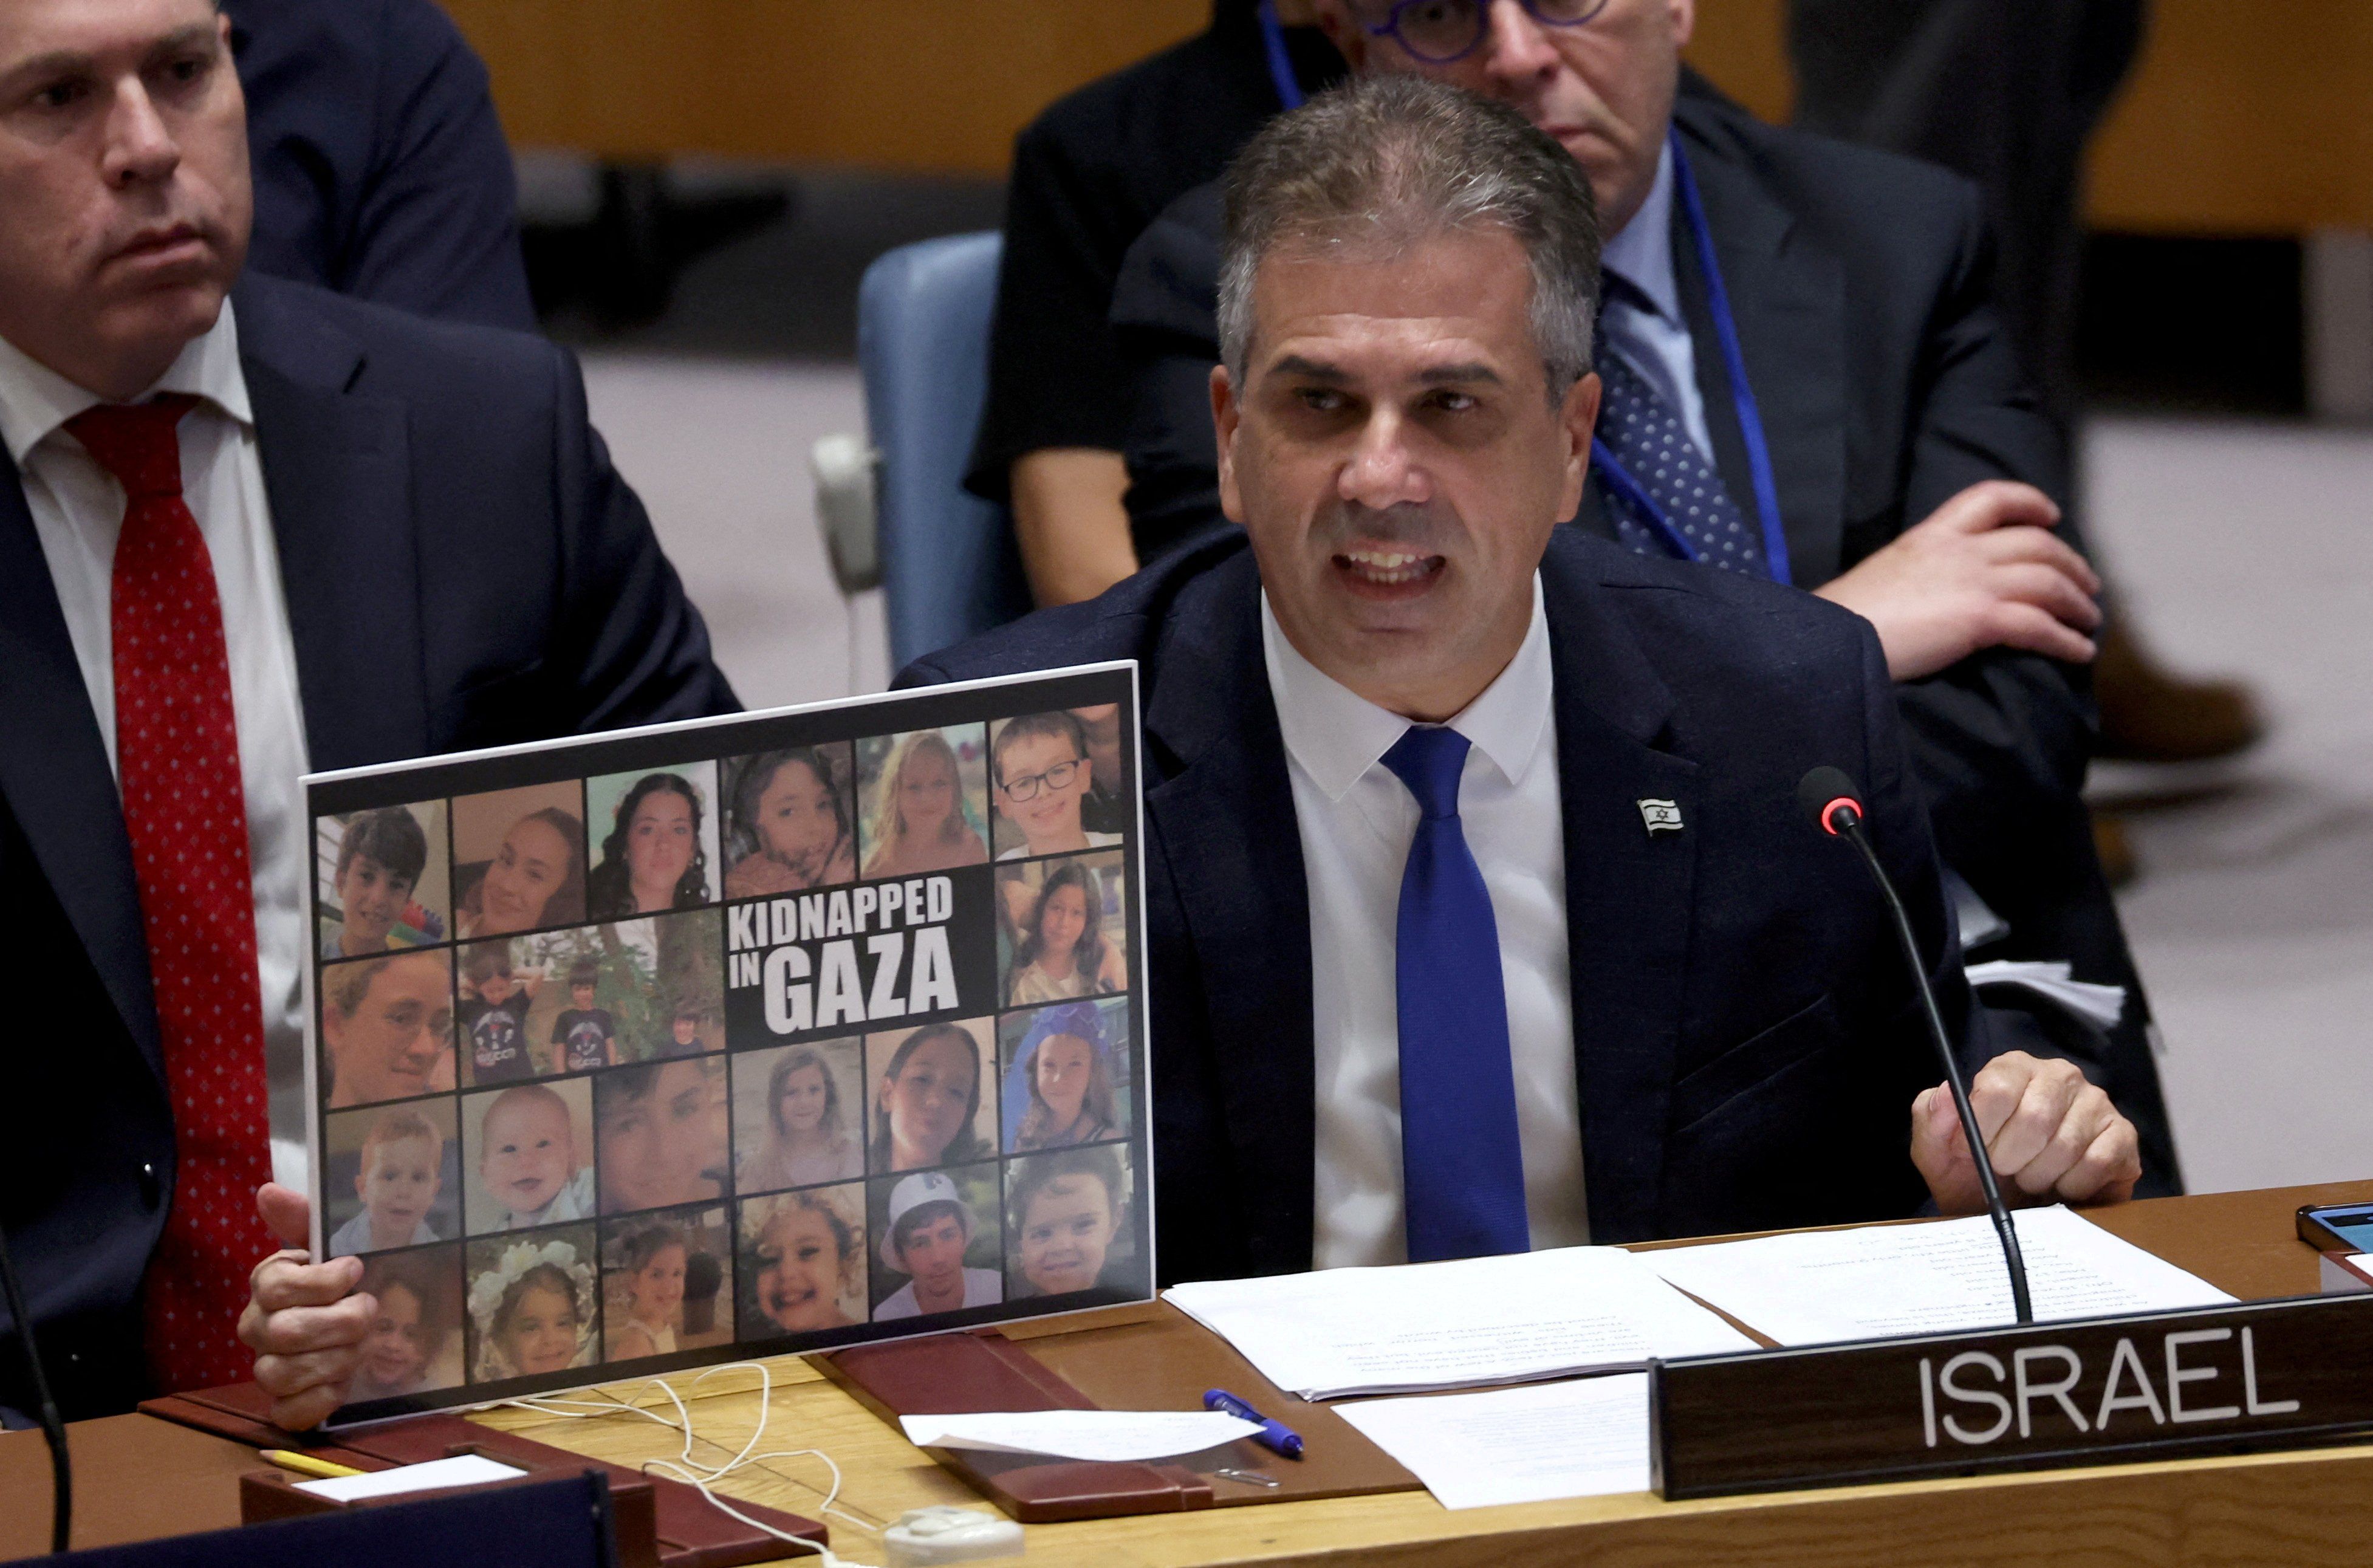 Israel's Foreign Affairs Minister Eli Cohen speaks during a meeting of the Security Council